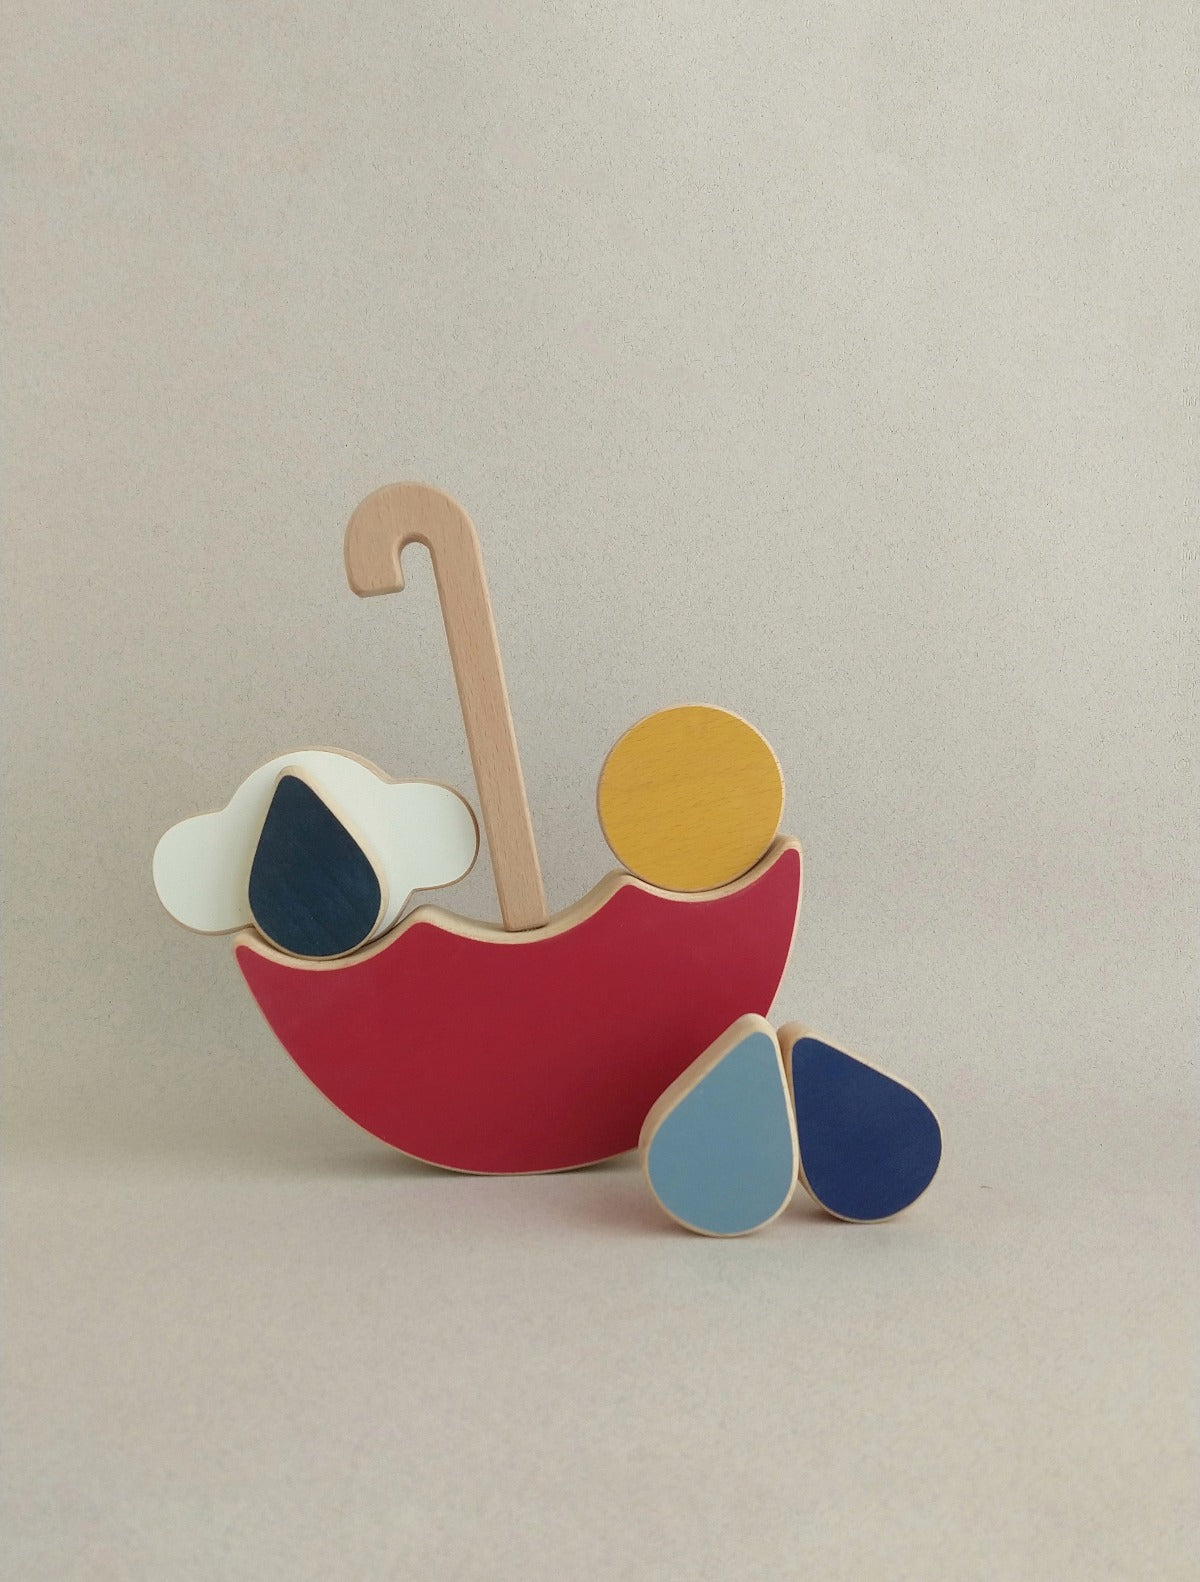 The red umbrella is a minimalist & playful wooden balance toy for toddlers.